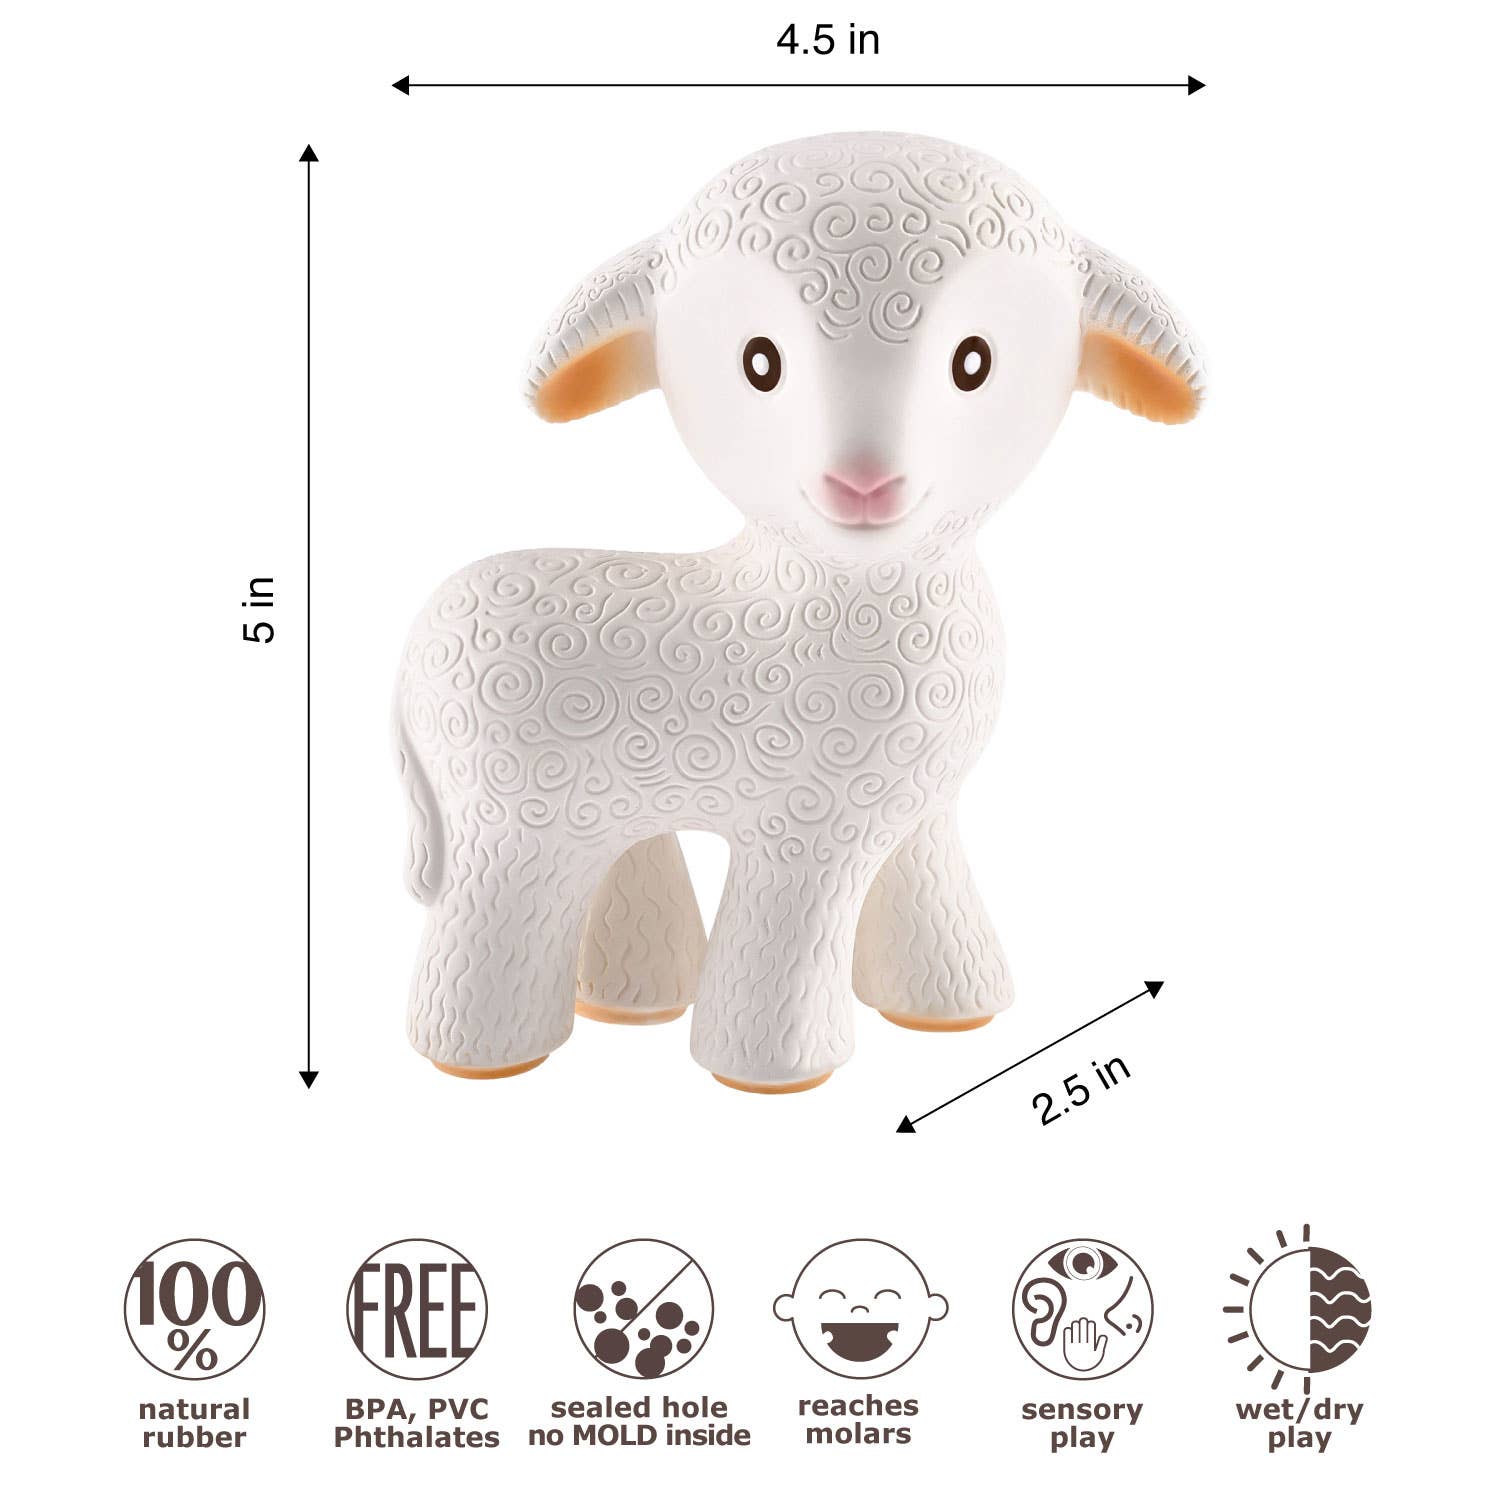 Mia the Lamb Teething Toy - 100% Pure Natural Rubber